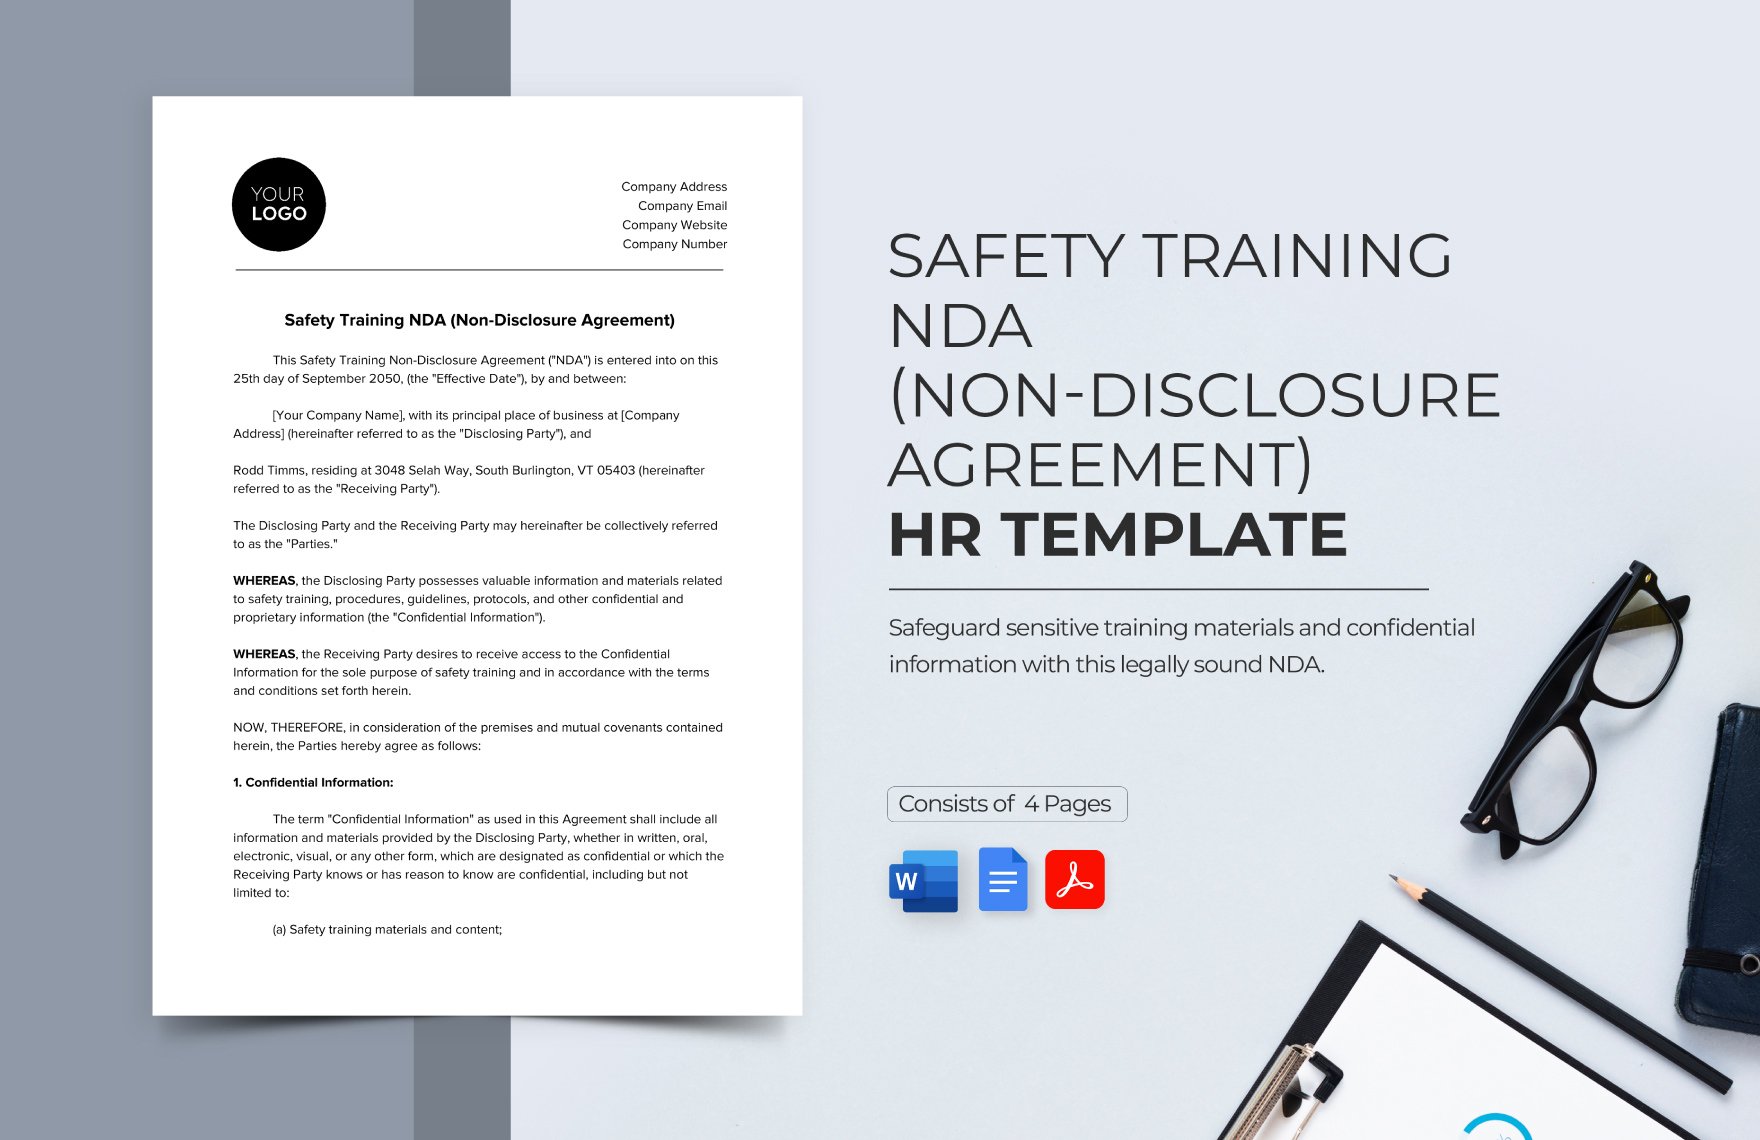 Safety Training NDA (Non-Disclosure Agreement) HR Template